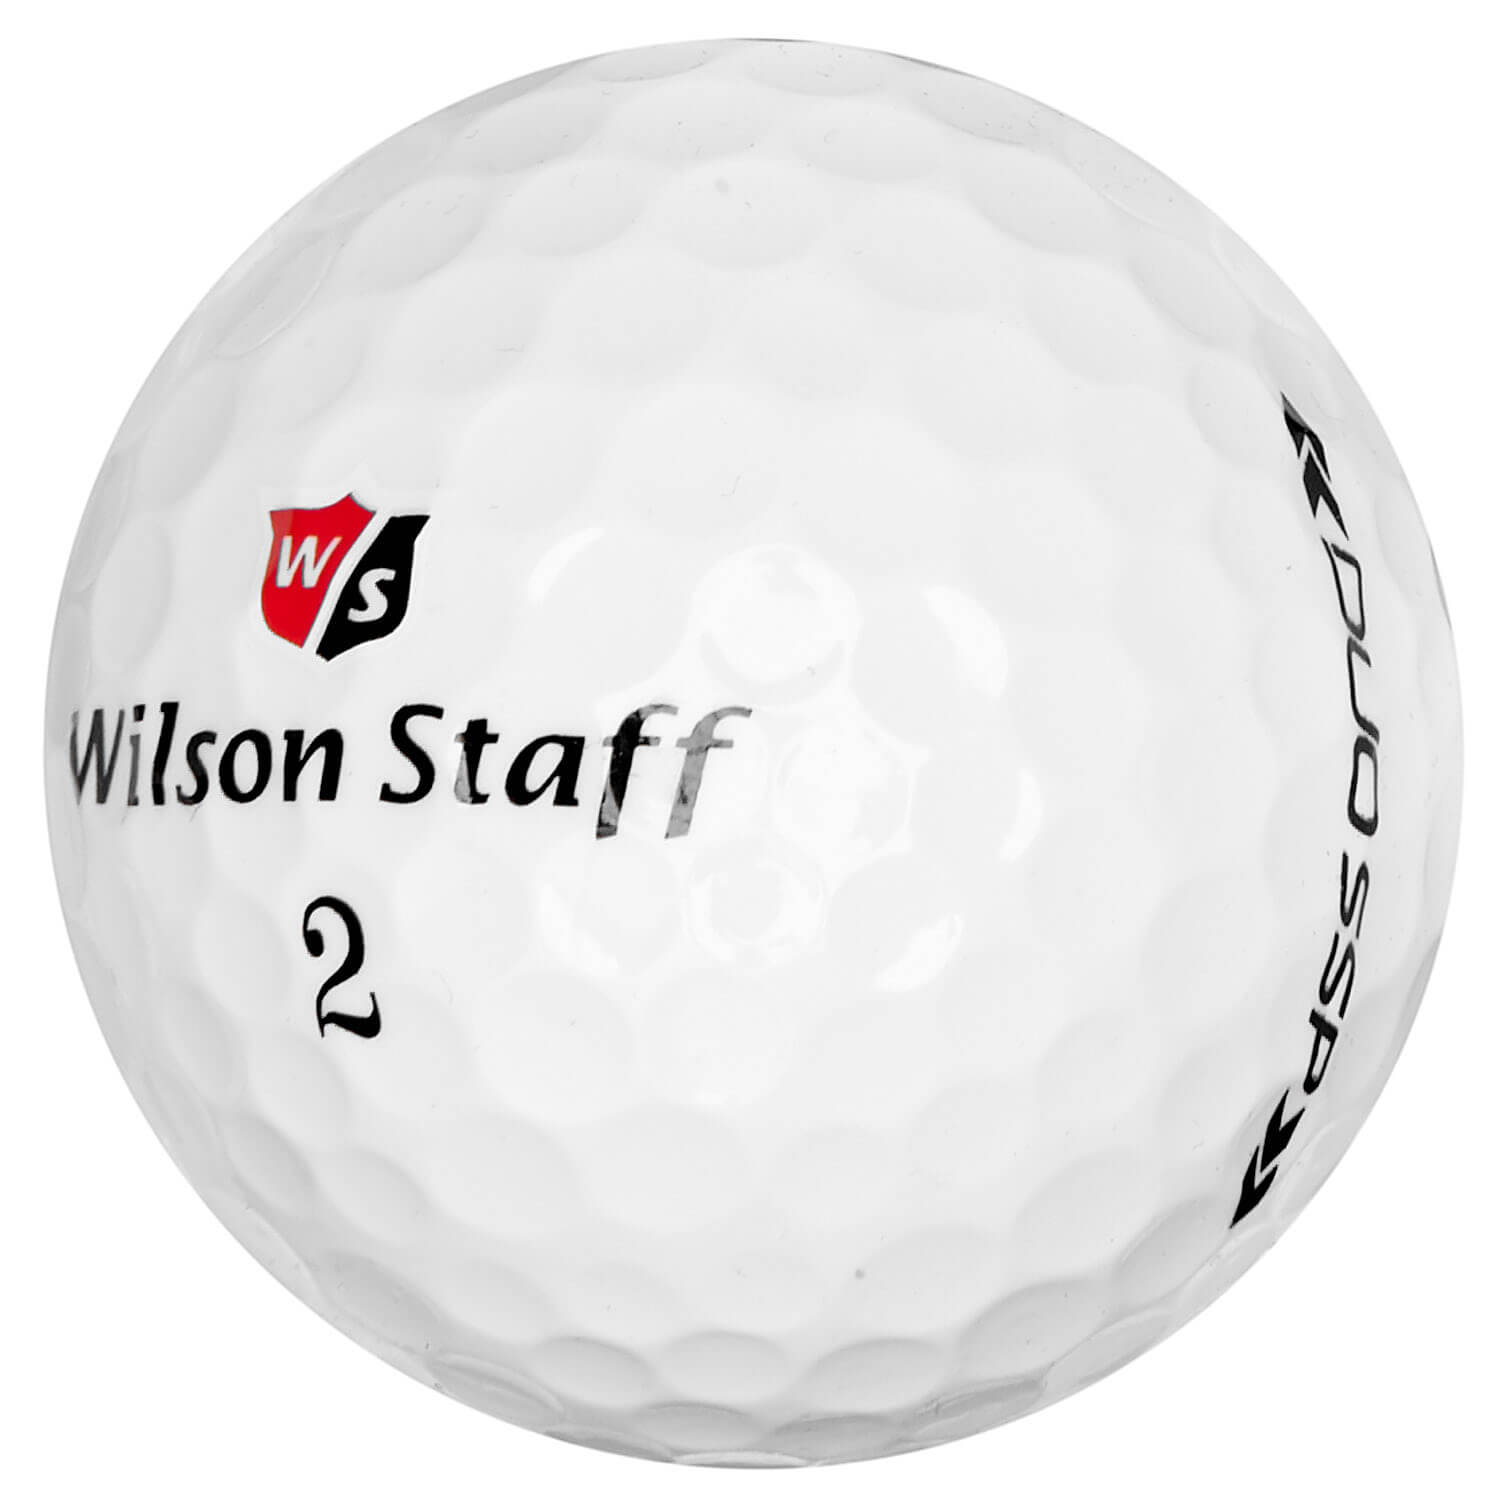 Wilson Staff DUO Soft Spin Golfbälle, white